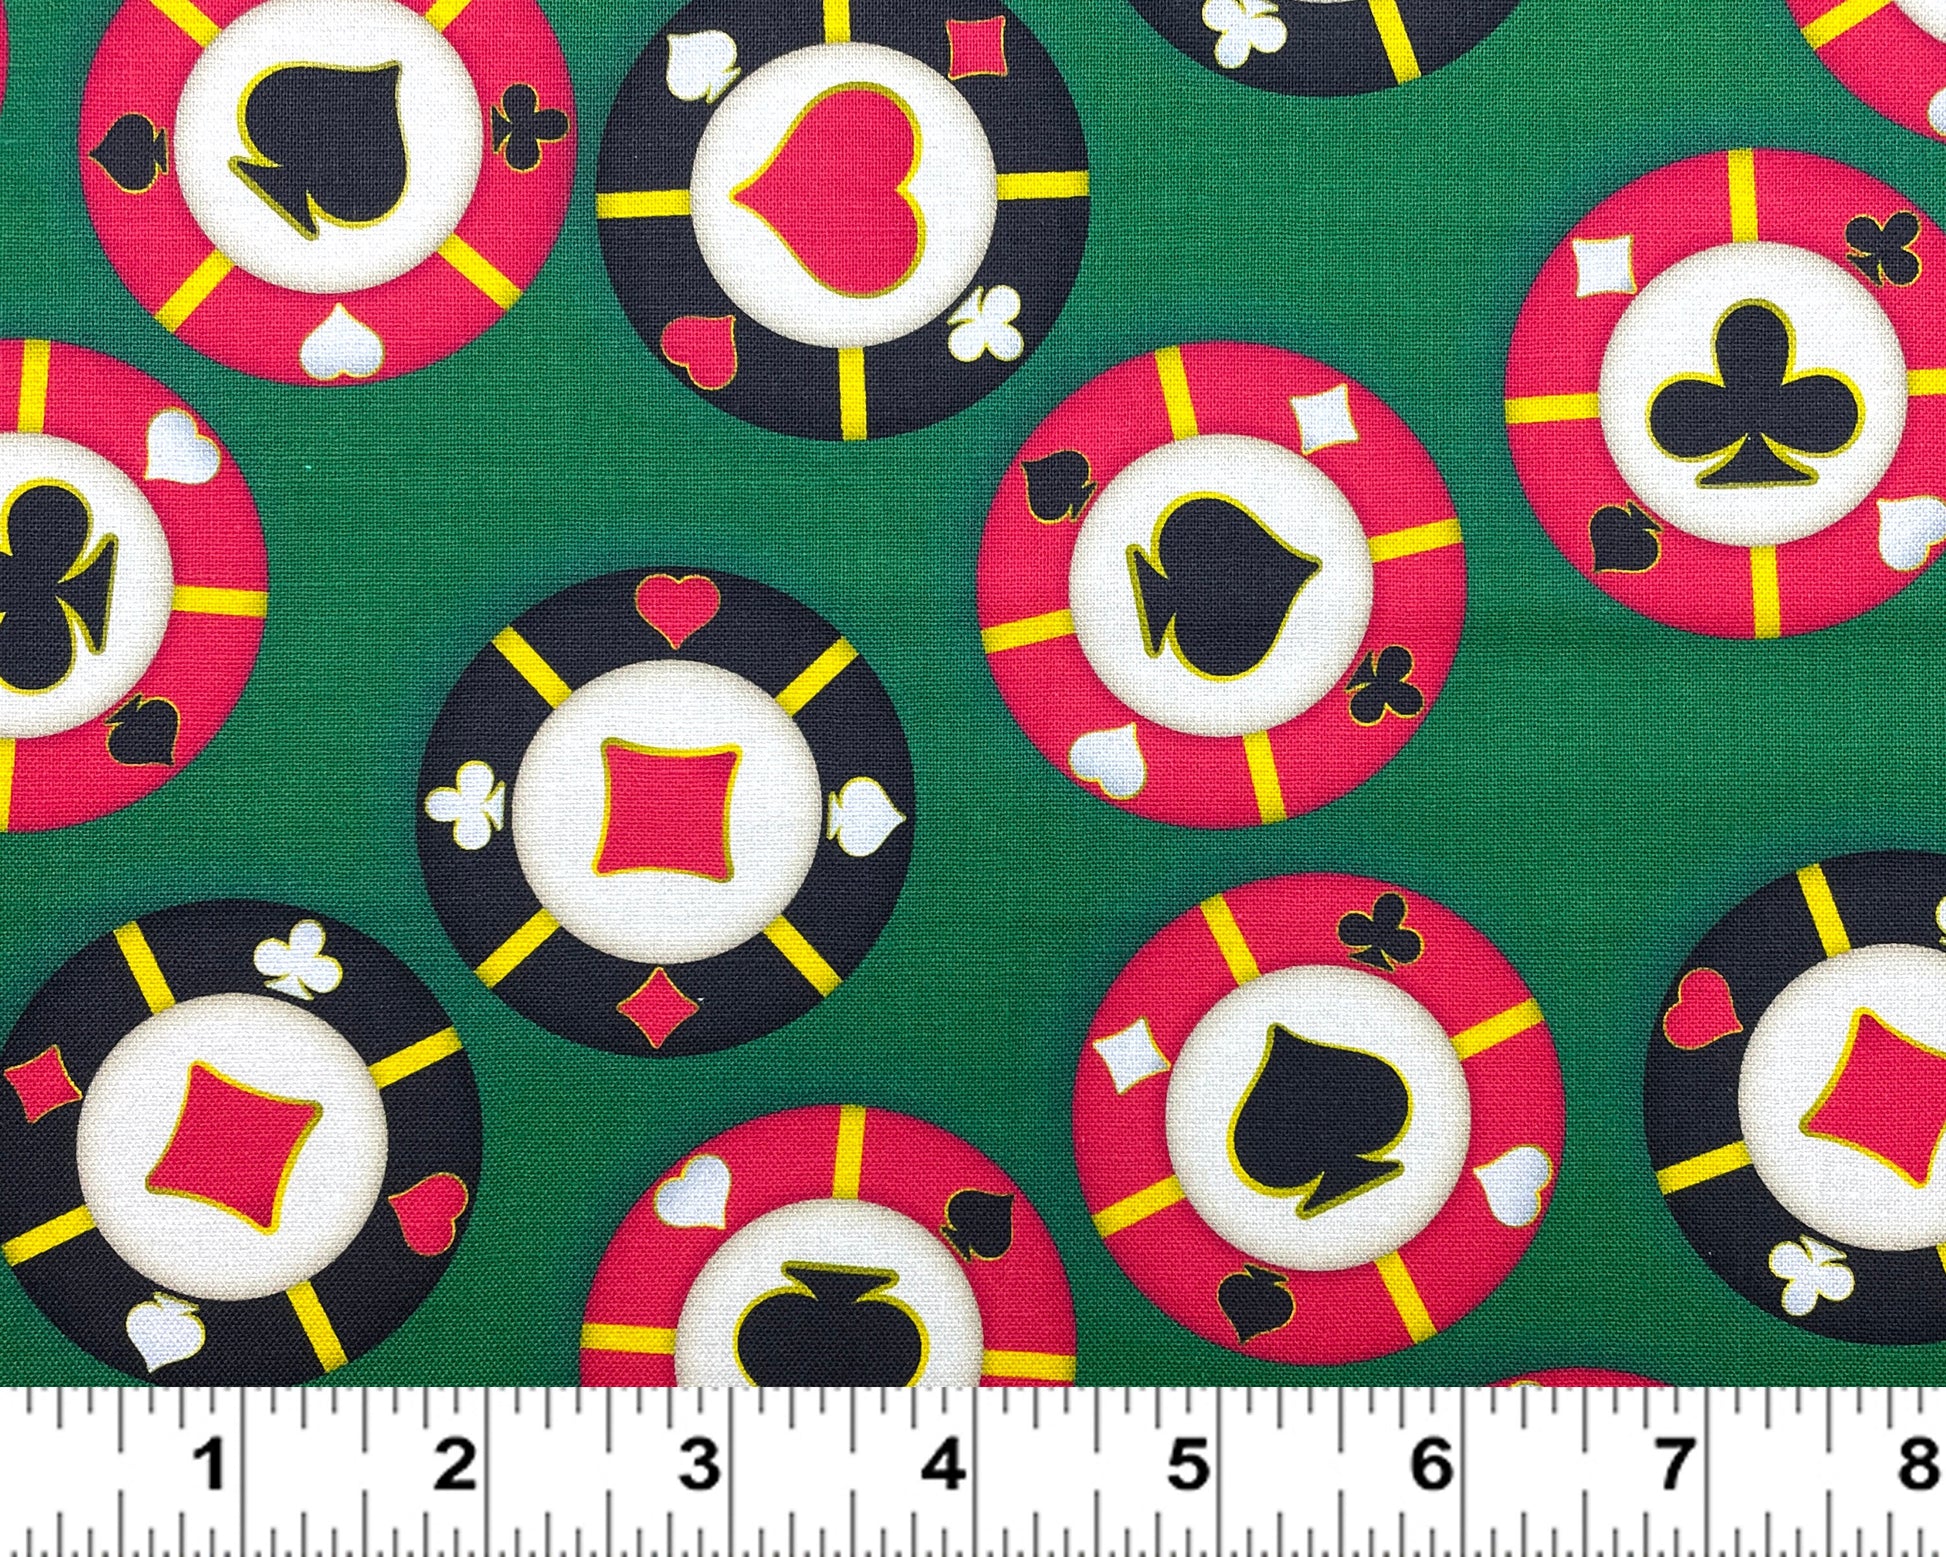 Poker Chips - 100% cotton fabric - Poker Card Game Game Night Casino - SHIPS NEXT DAY